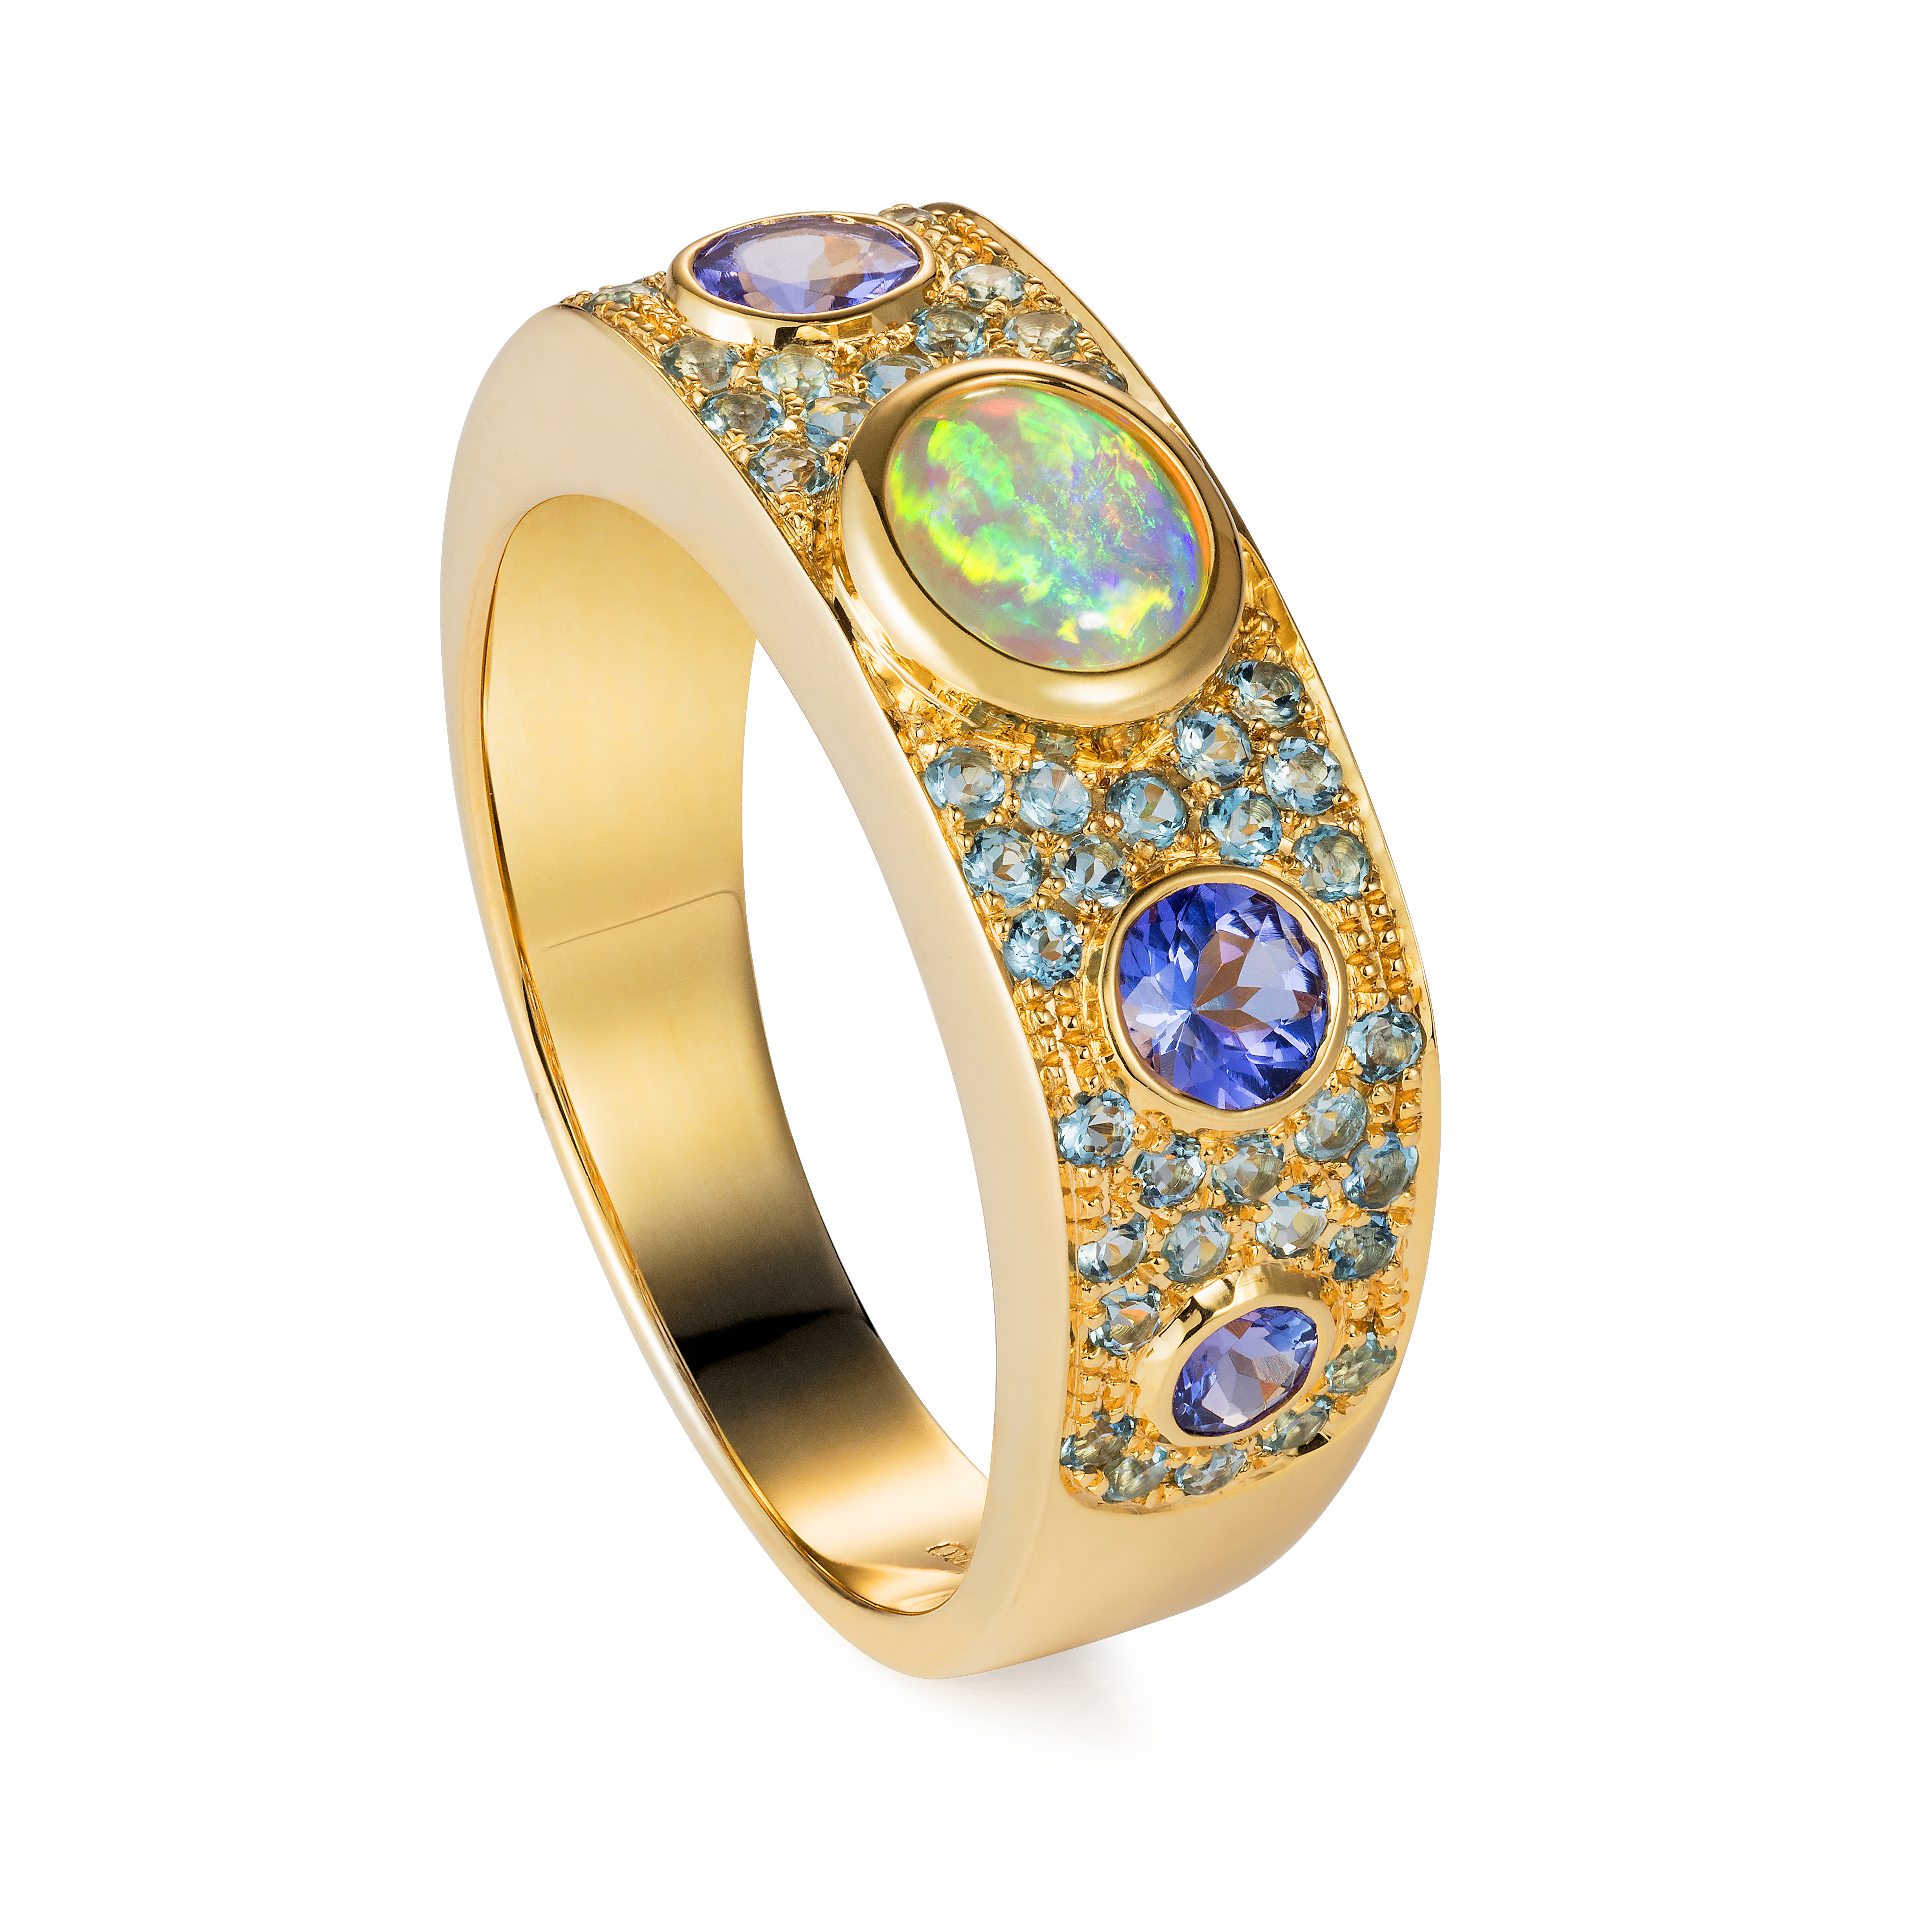 A Ring In The Caribbean Spirit Set With An Antique Opal, Tanzanite And Aquamarines 18k Gold